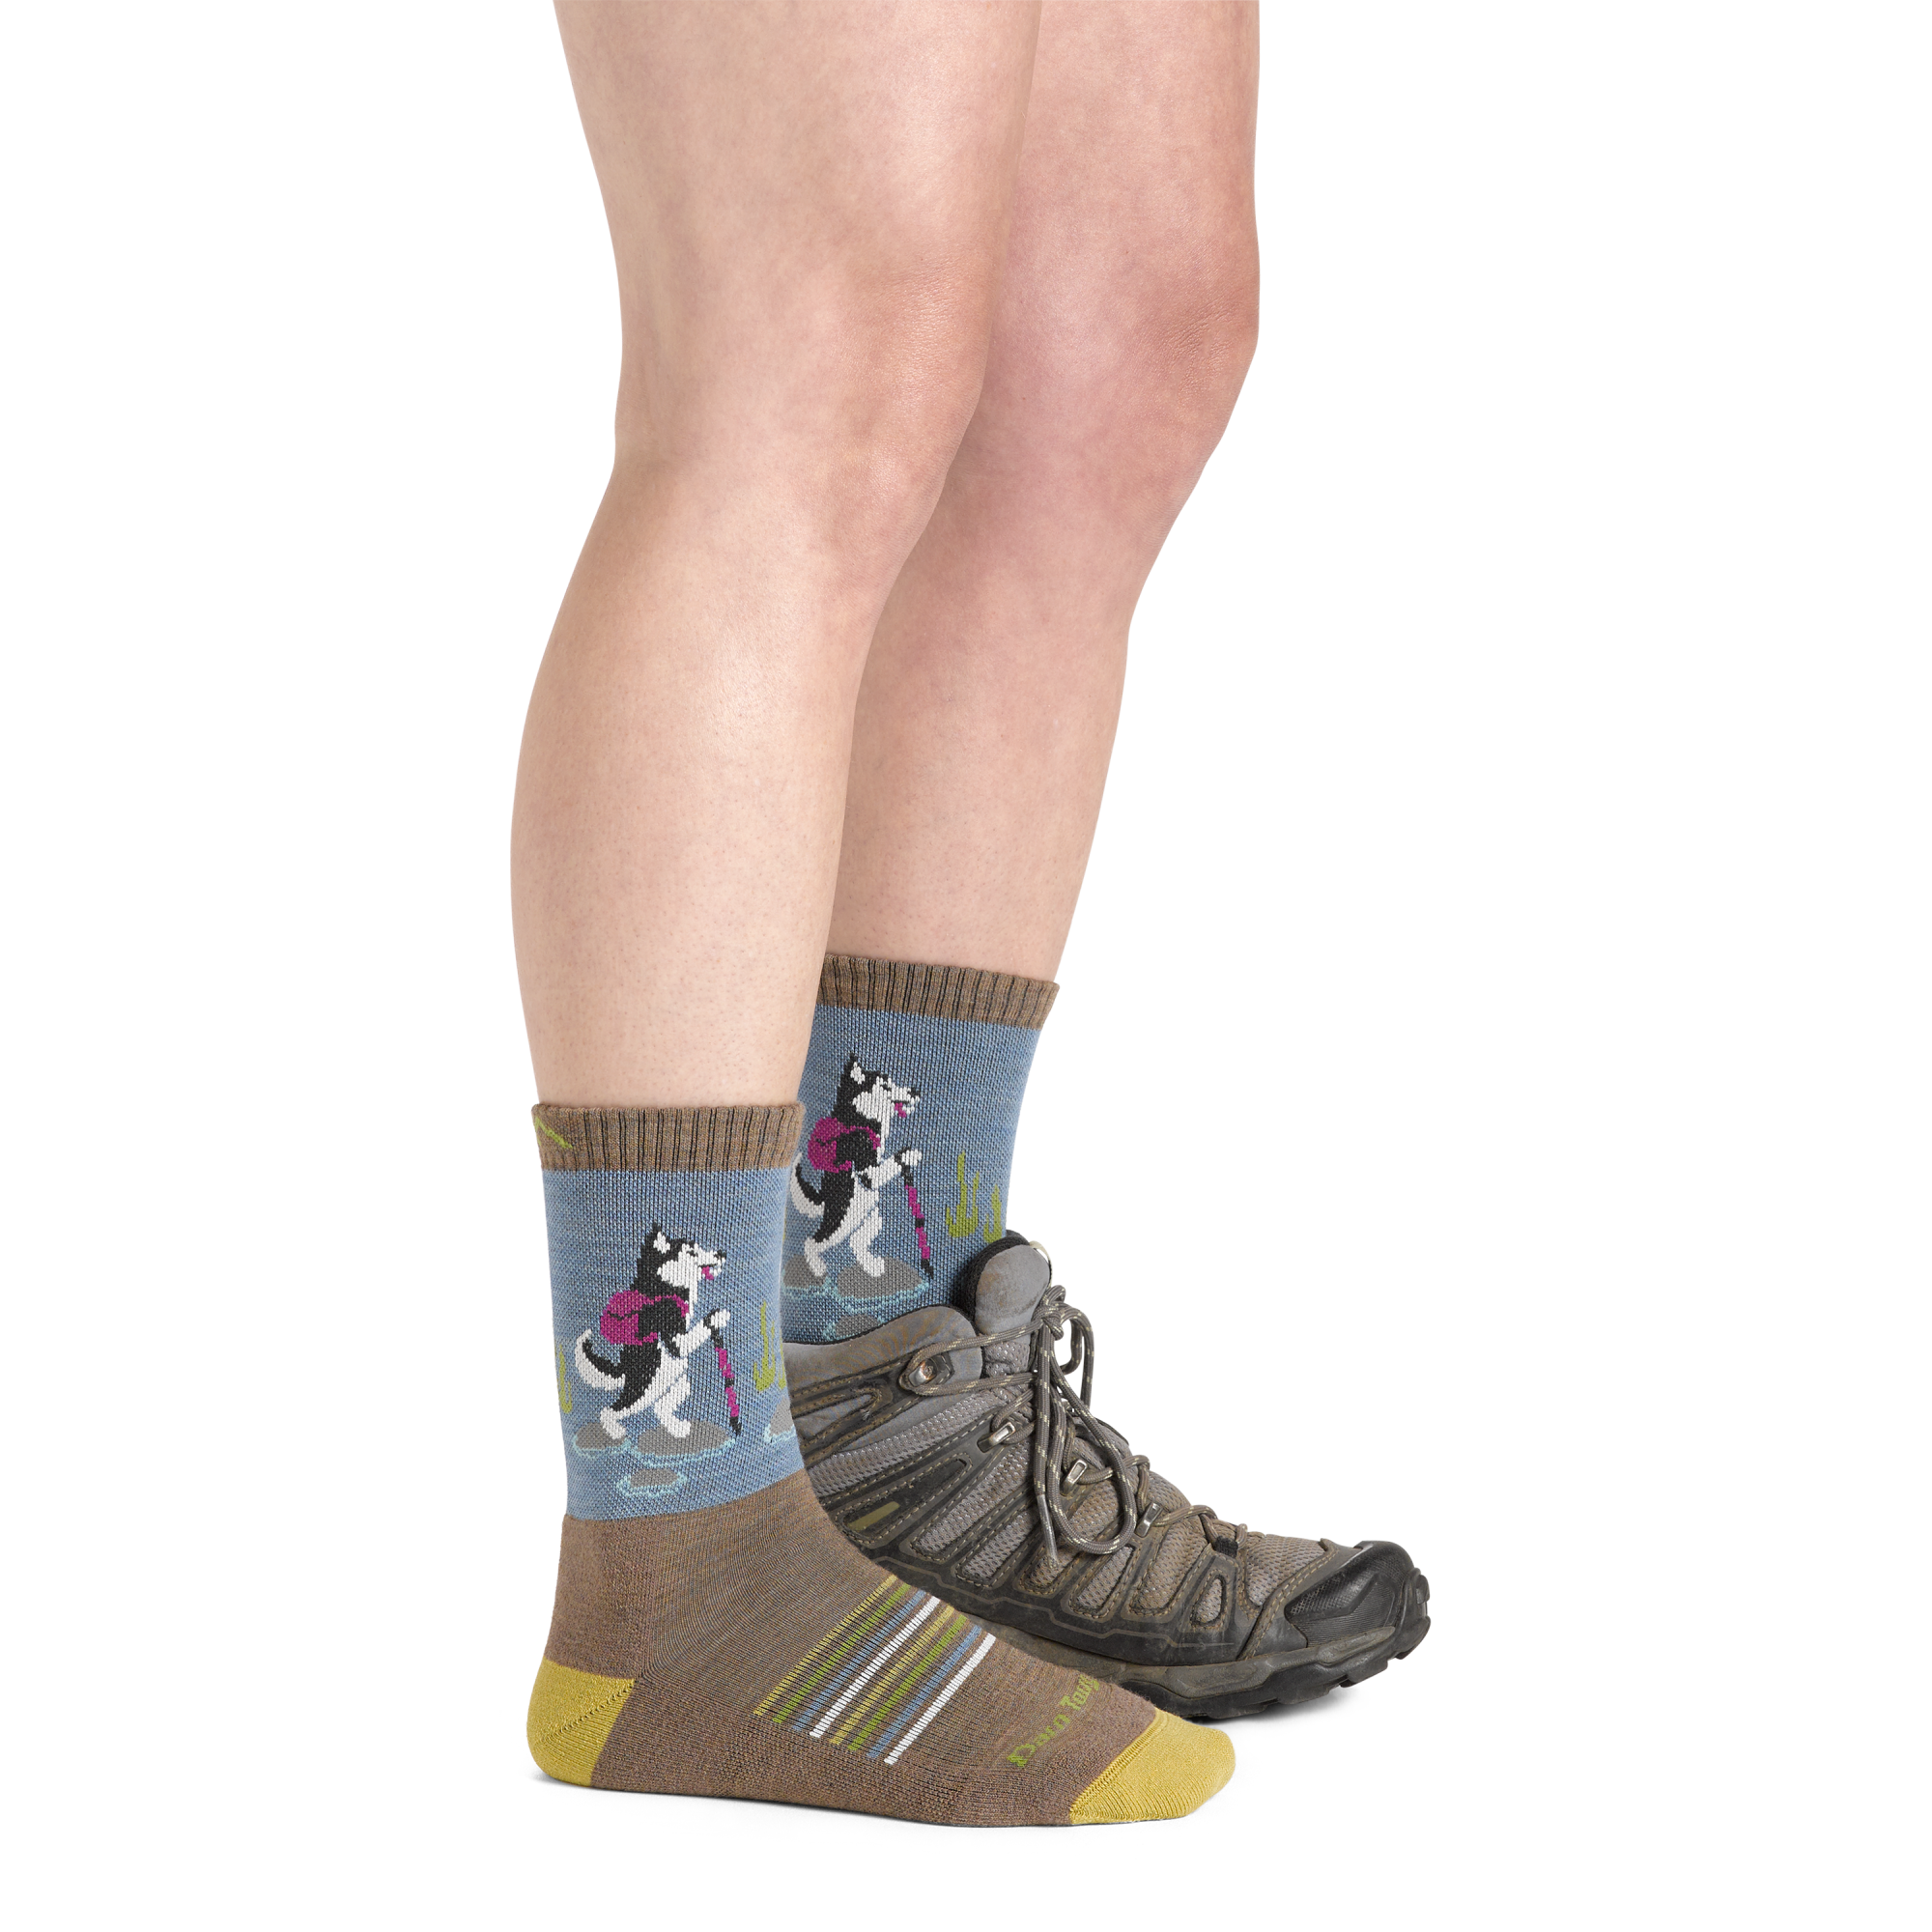 Side shot of model wearing the women's critter club micro crew hiking sock in bark colorway with a brown boot on her left foot